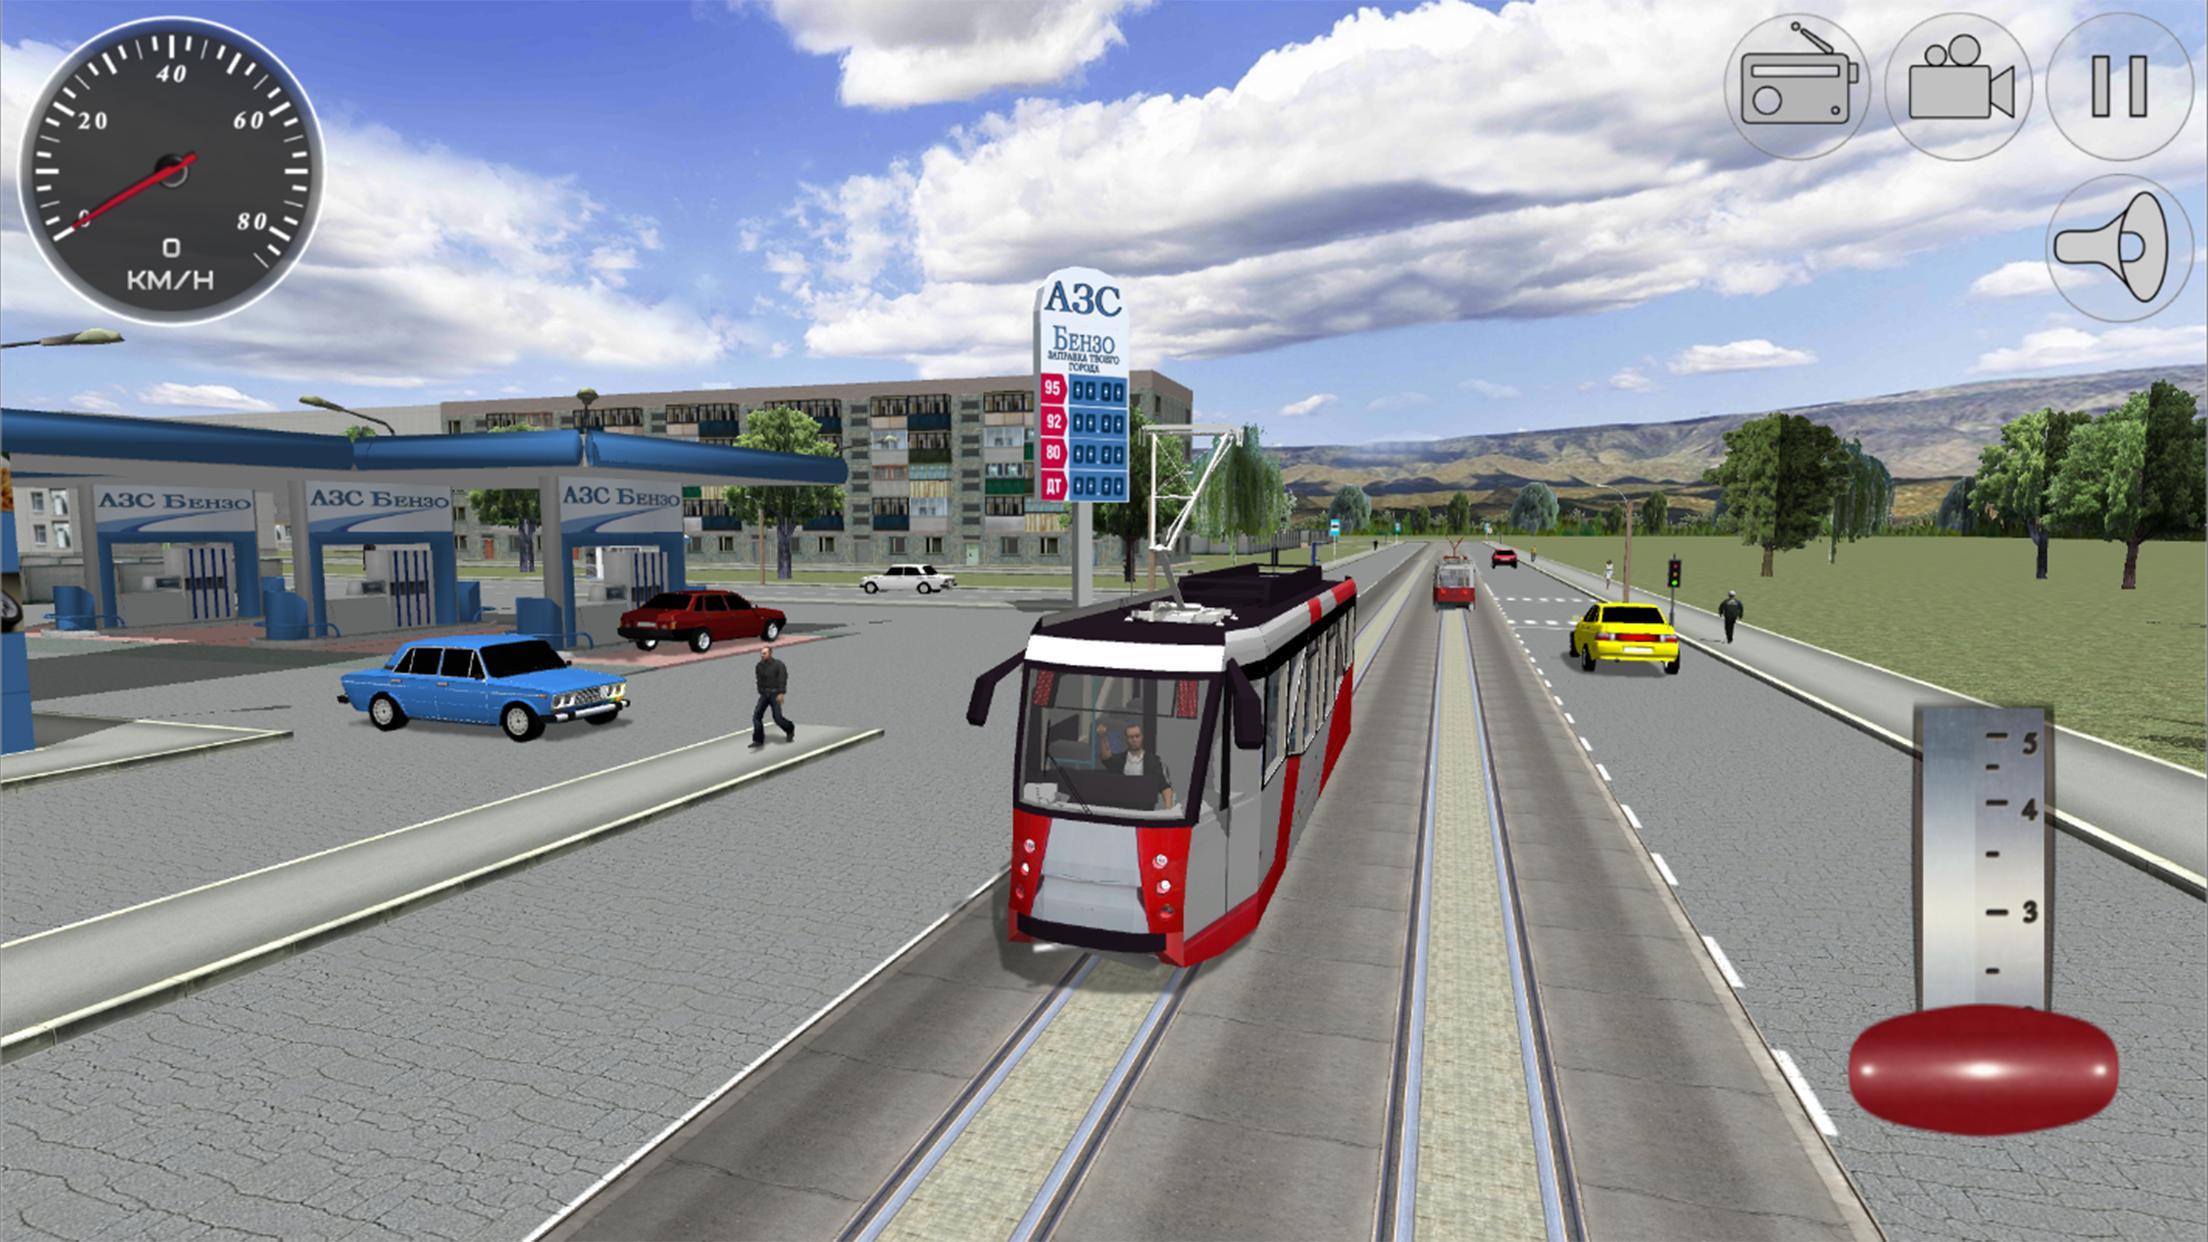 Tram Driver Simulator 2018 For Android - APK Download